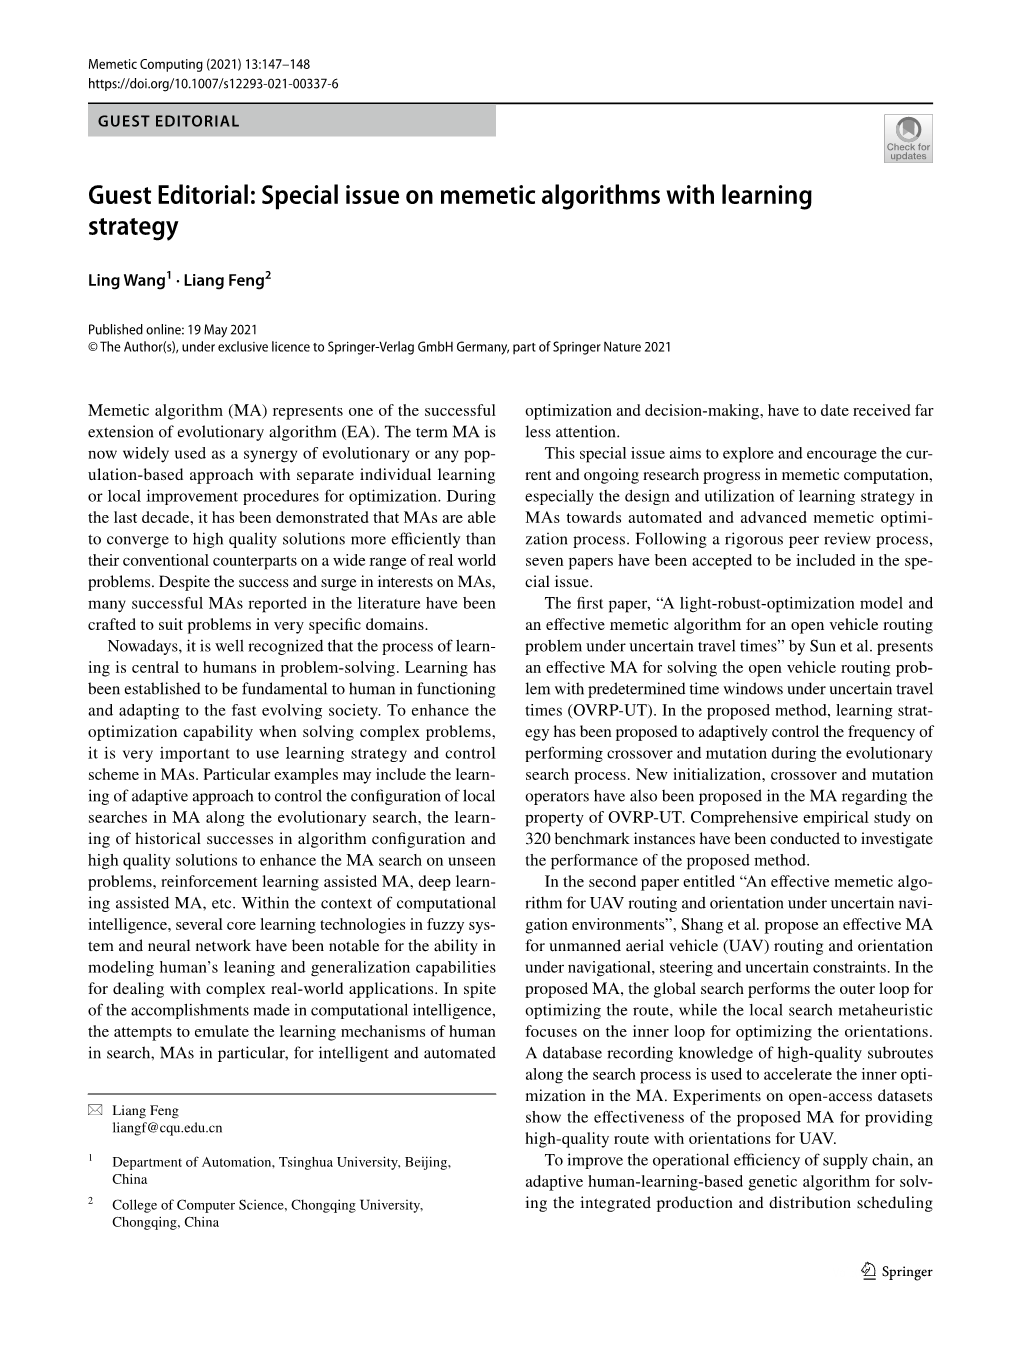 Special Issue on Memetic Algorithms with Learning Strategy